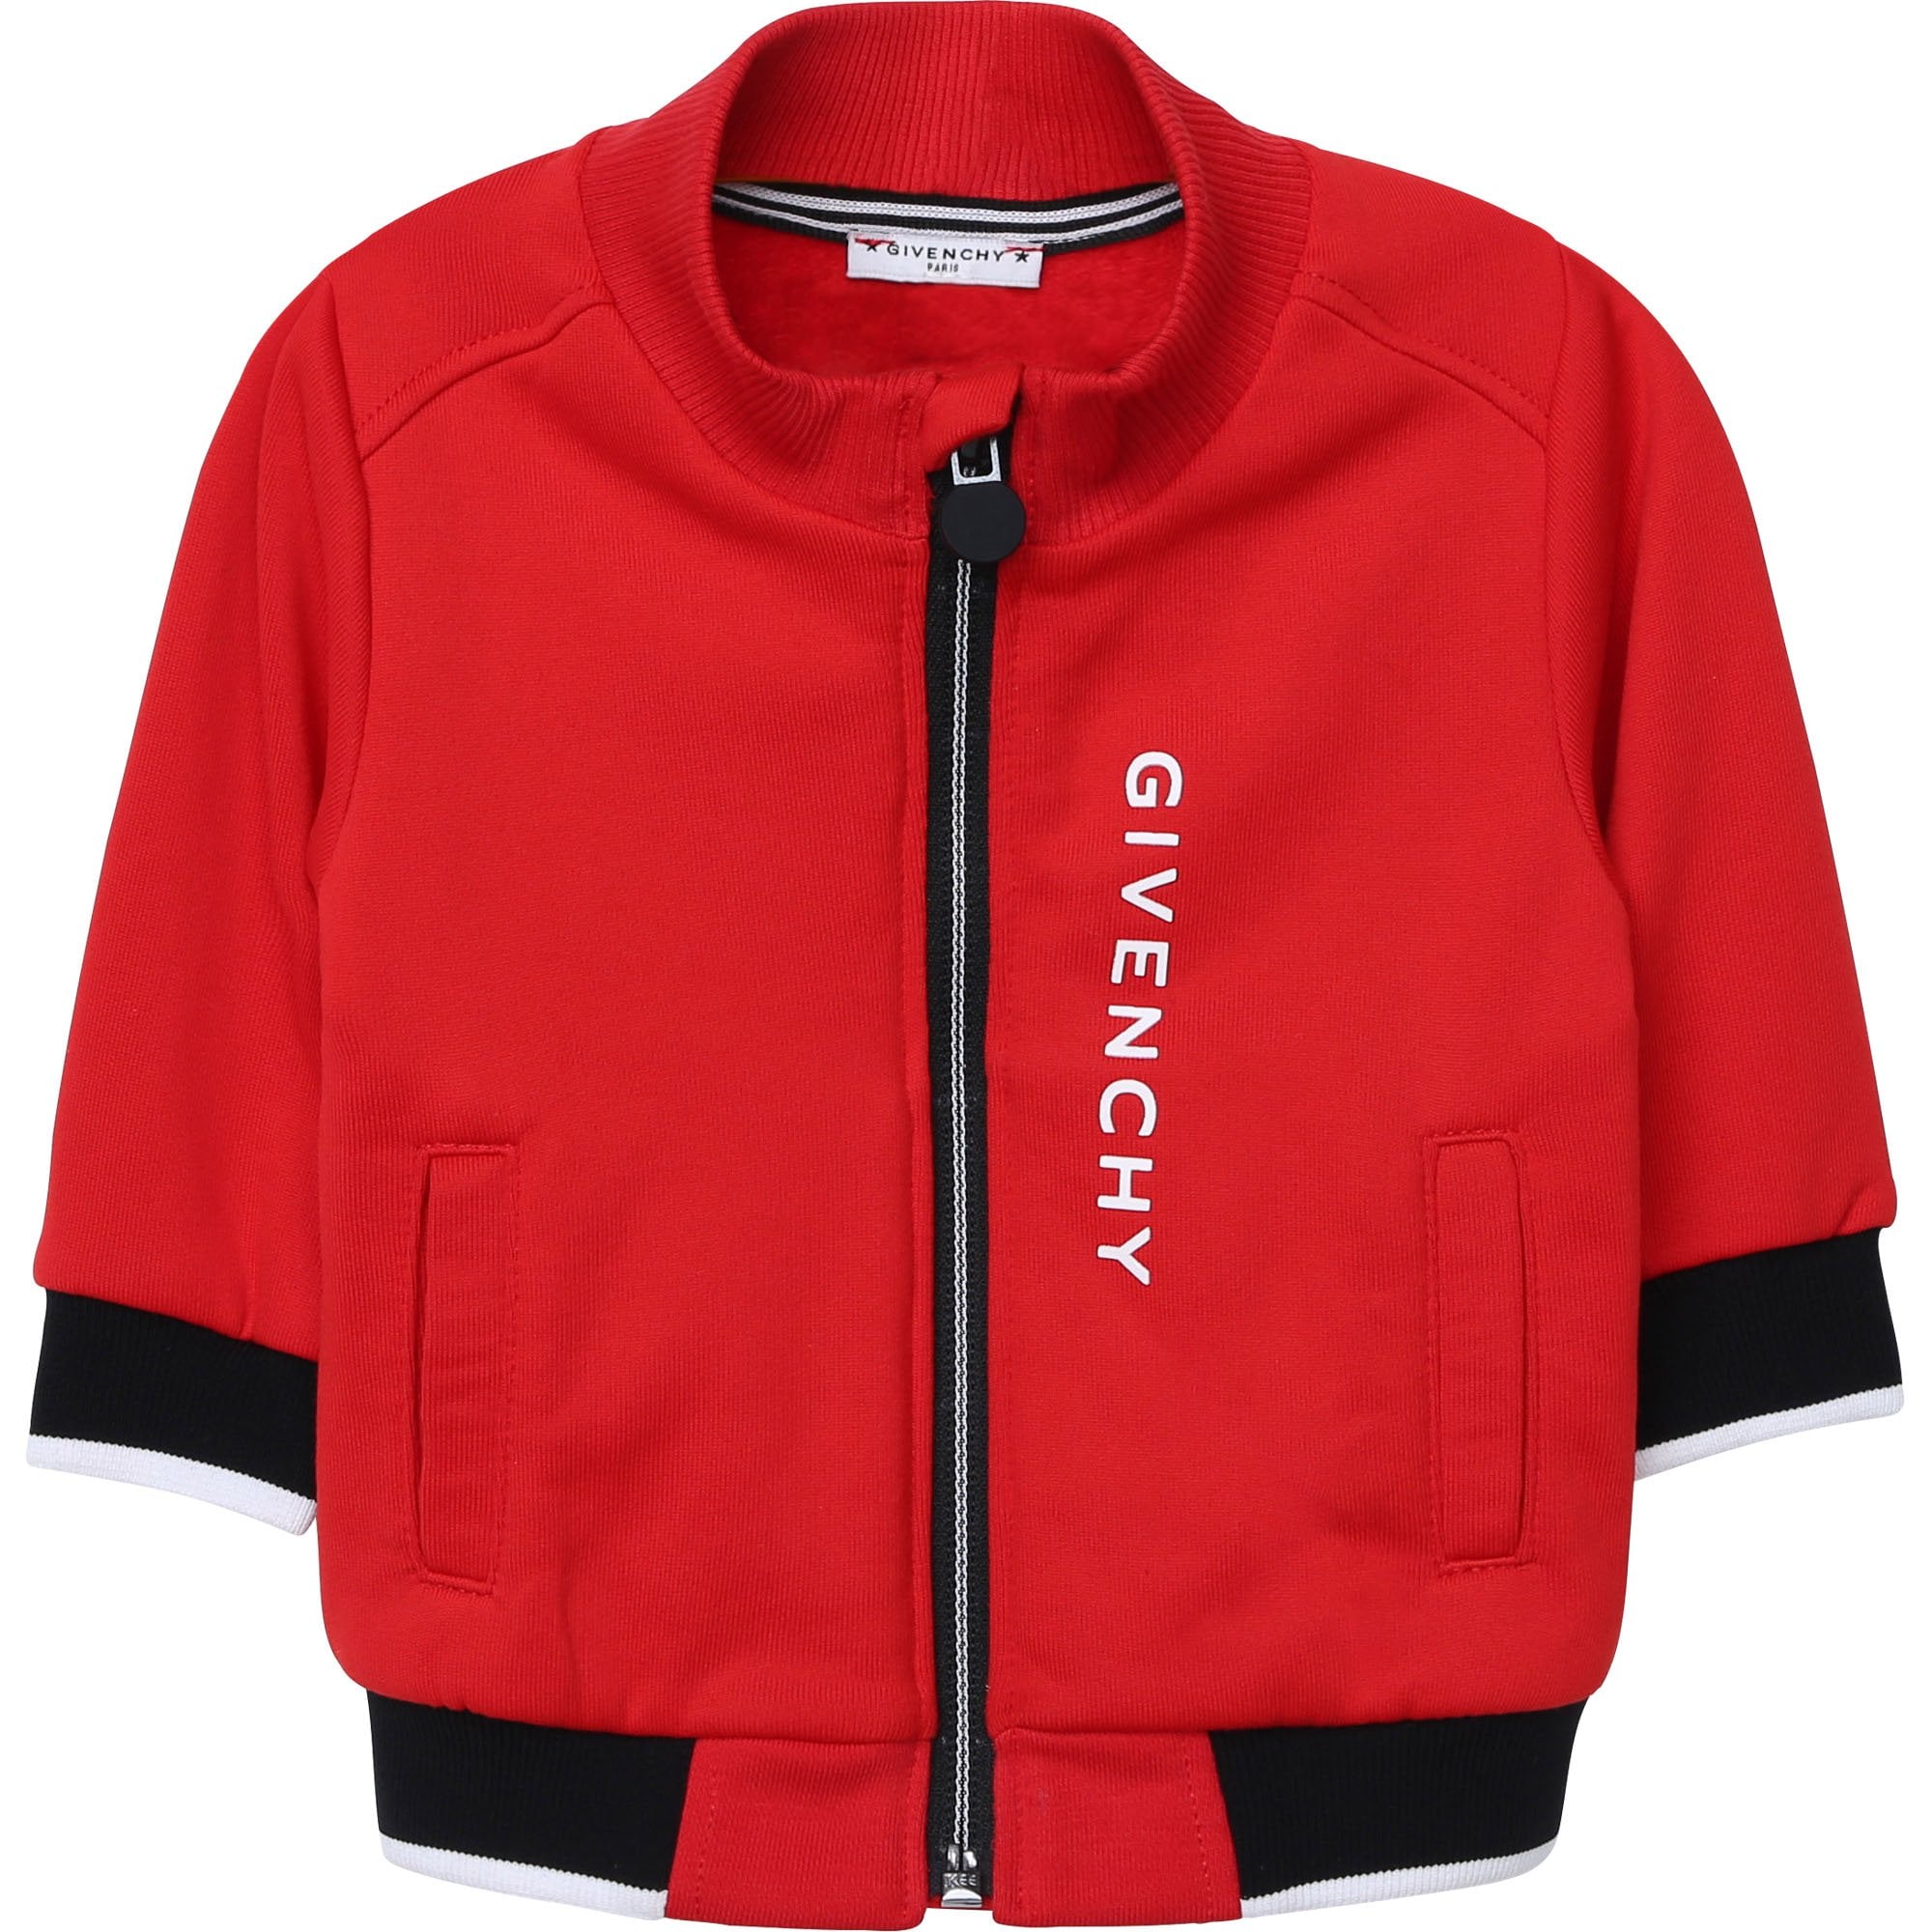 Givenchy Baby Boys Logo Zip Top Red